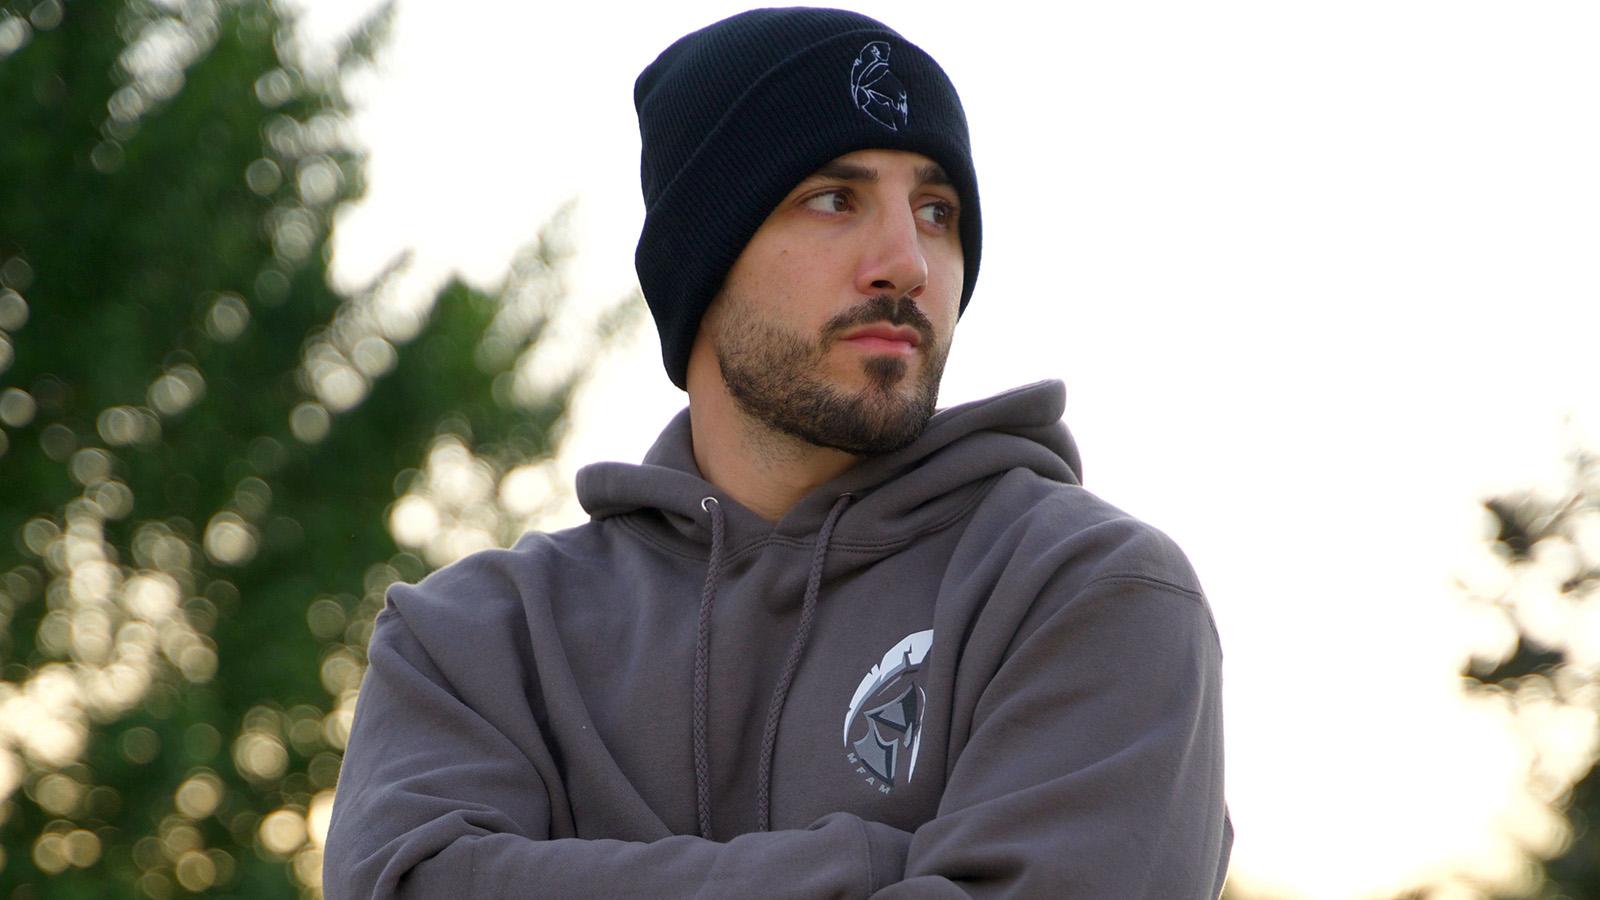 Nickmercs Partners With H4X on MFAM Blackout 2.0 Collection